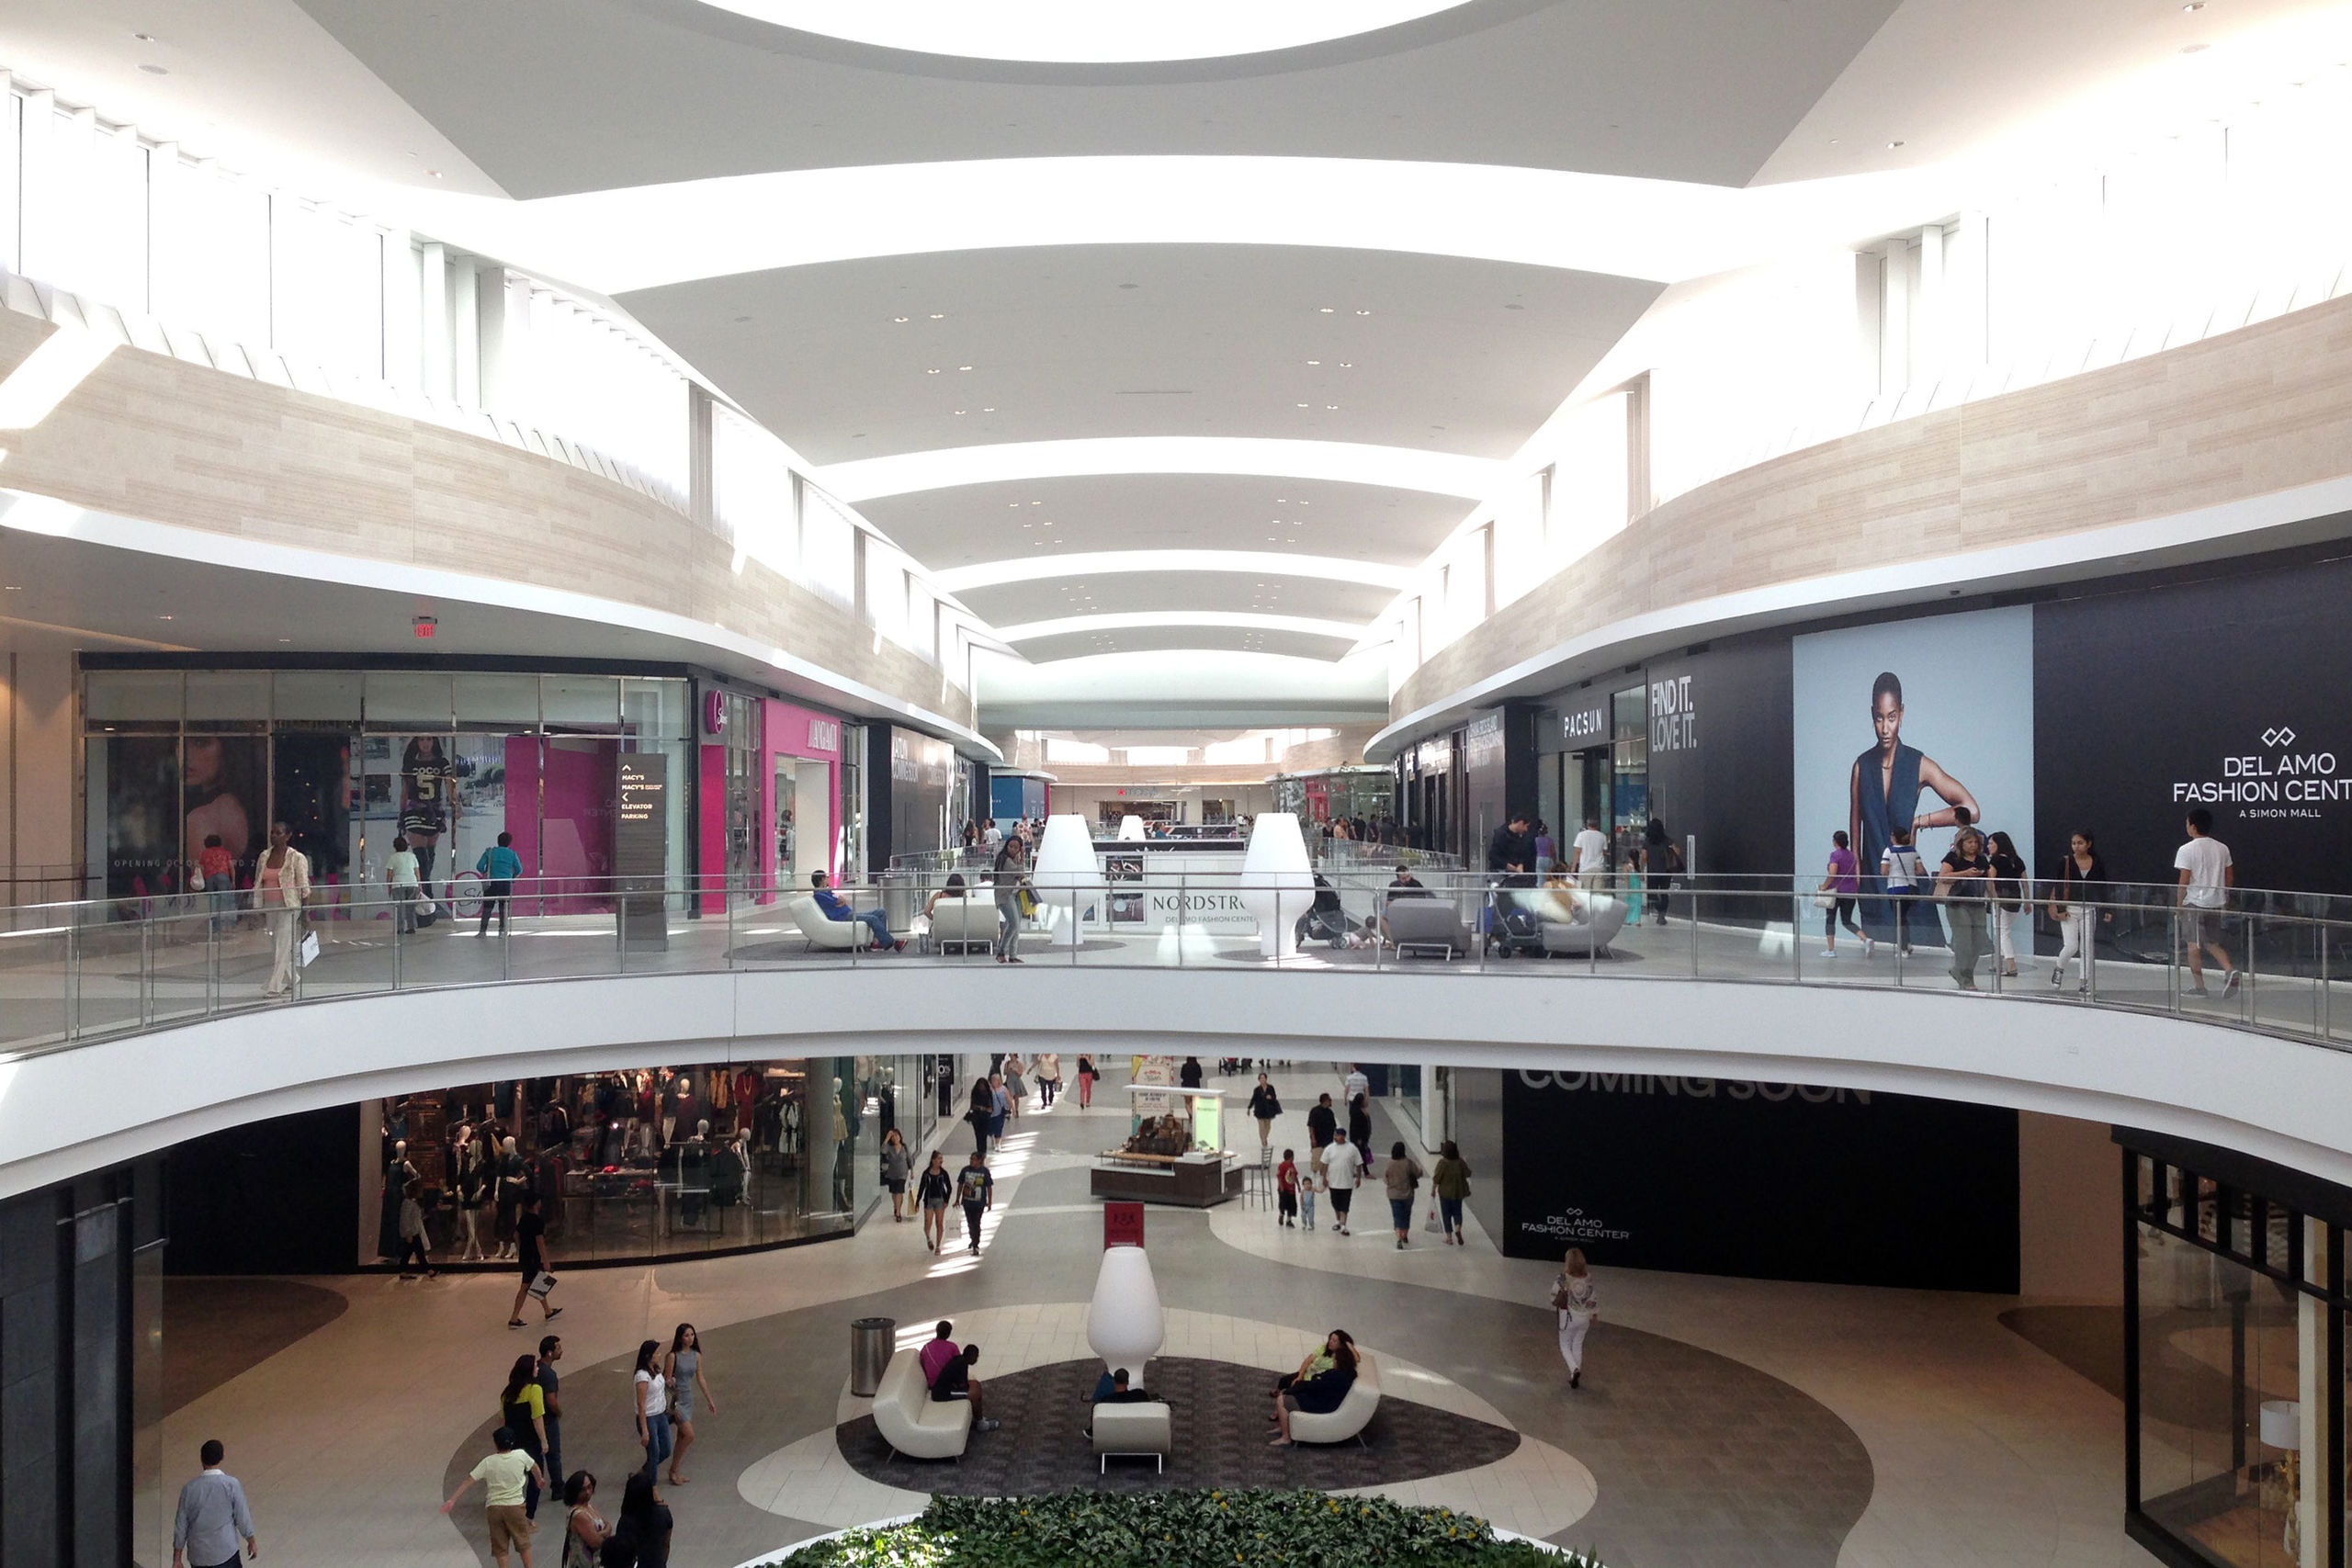 Best Shopping Malls In Los Angeles And Orange County - CBS Los Angeles